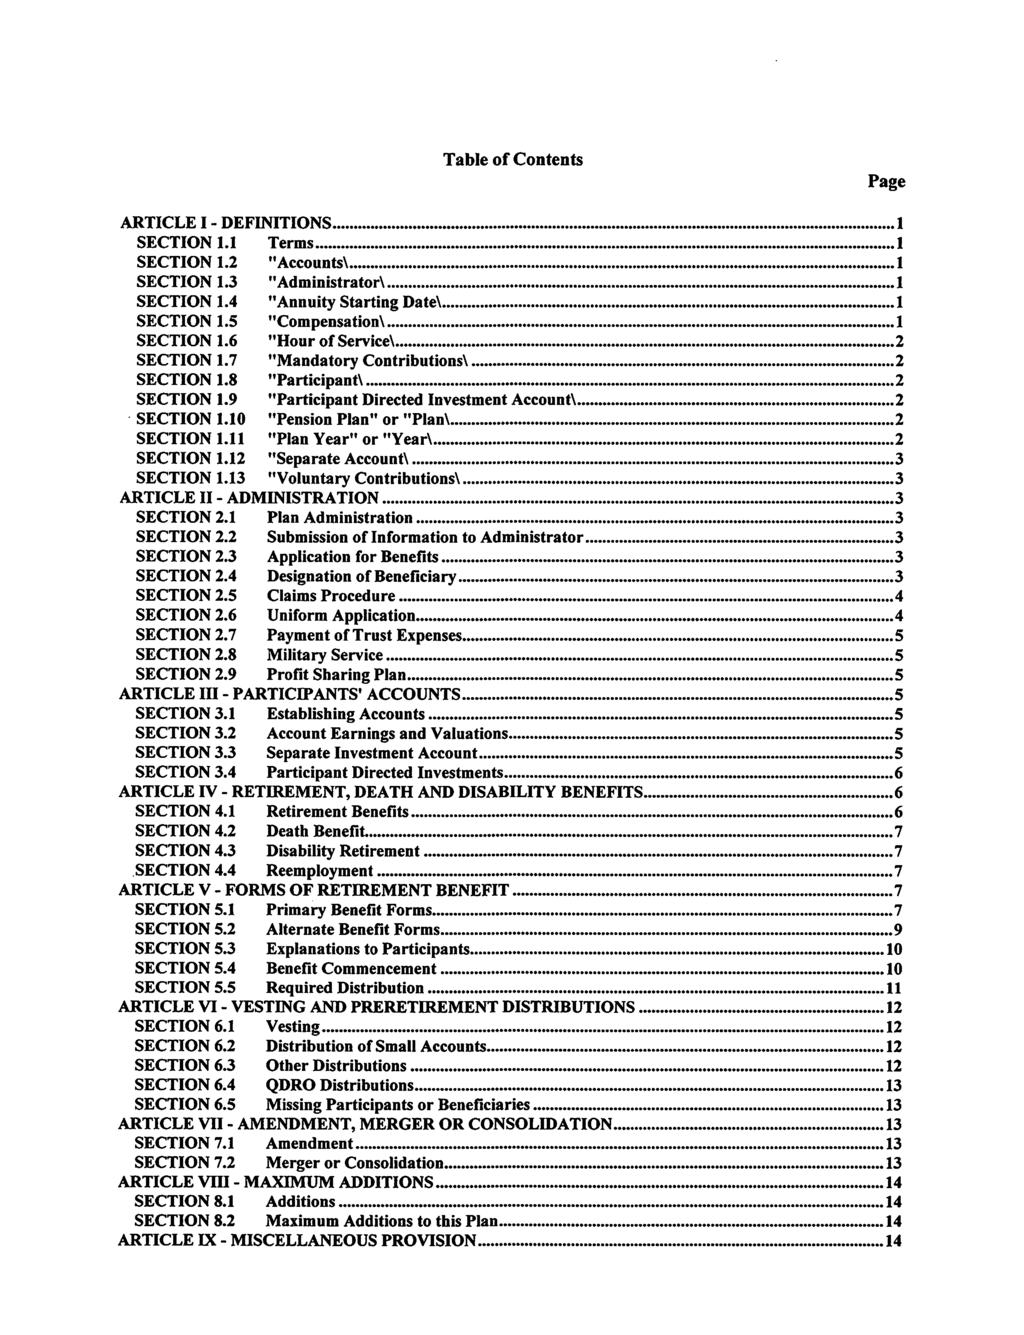 Table of Contents Page ARTICLE I - DEFINITIONS SECTION 1.1 SECTION 1.2 SECTION 1.3 Terms "Accounts\ "Admmistrator\ SECTION 1.4 "Annuity Starting Date\ SECTION 1.5 "Compen$ation\ SECTION 1.